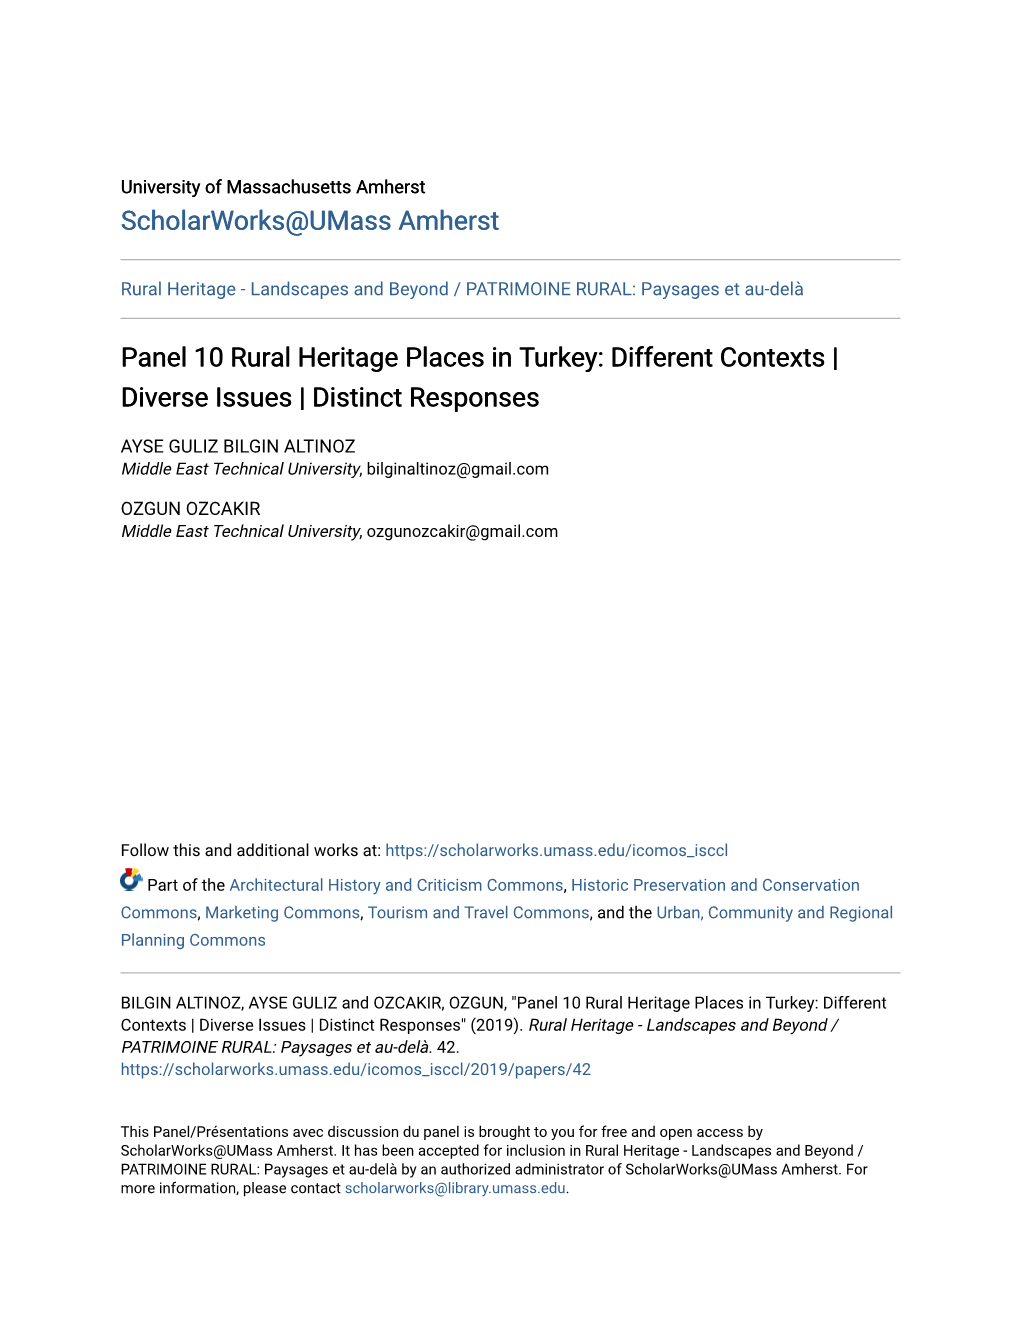 Panel 10 Rural Heritage Places in Turkey: Different Contexts | Diverse Issues | Distinct Responses